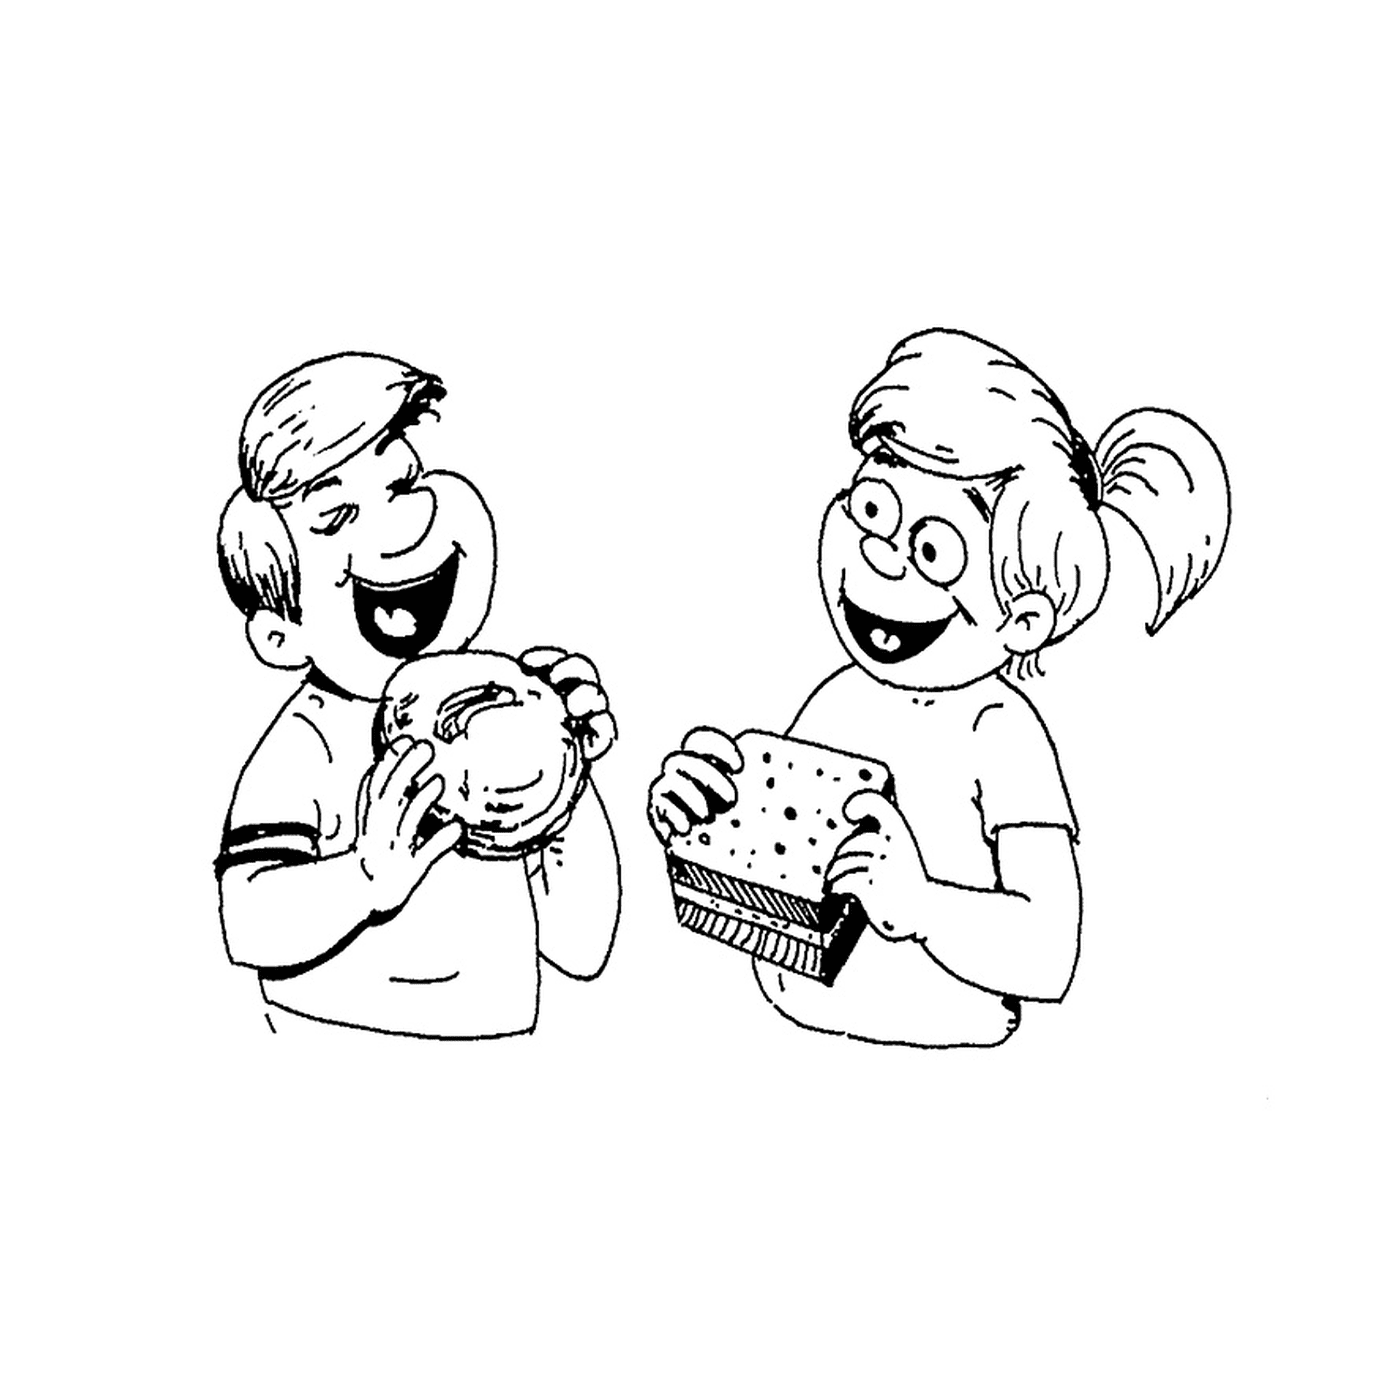  A boy and a girl eat a snack sandwich 